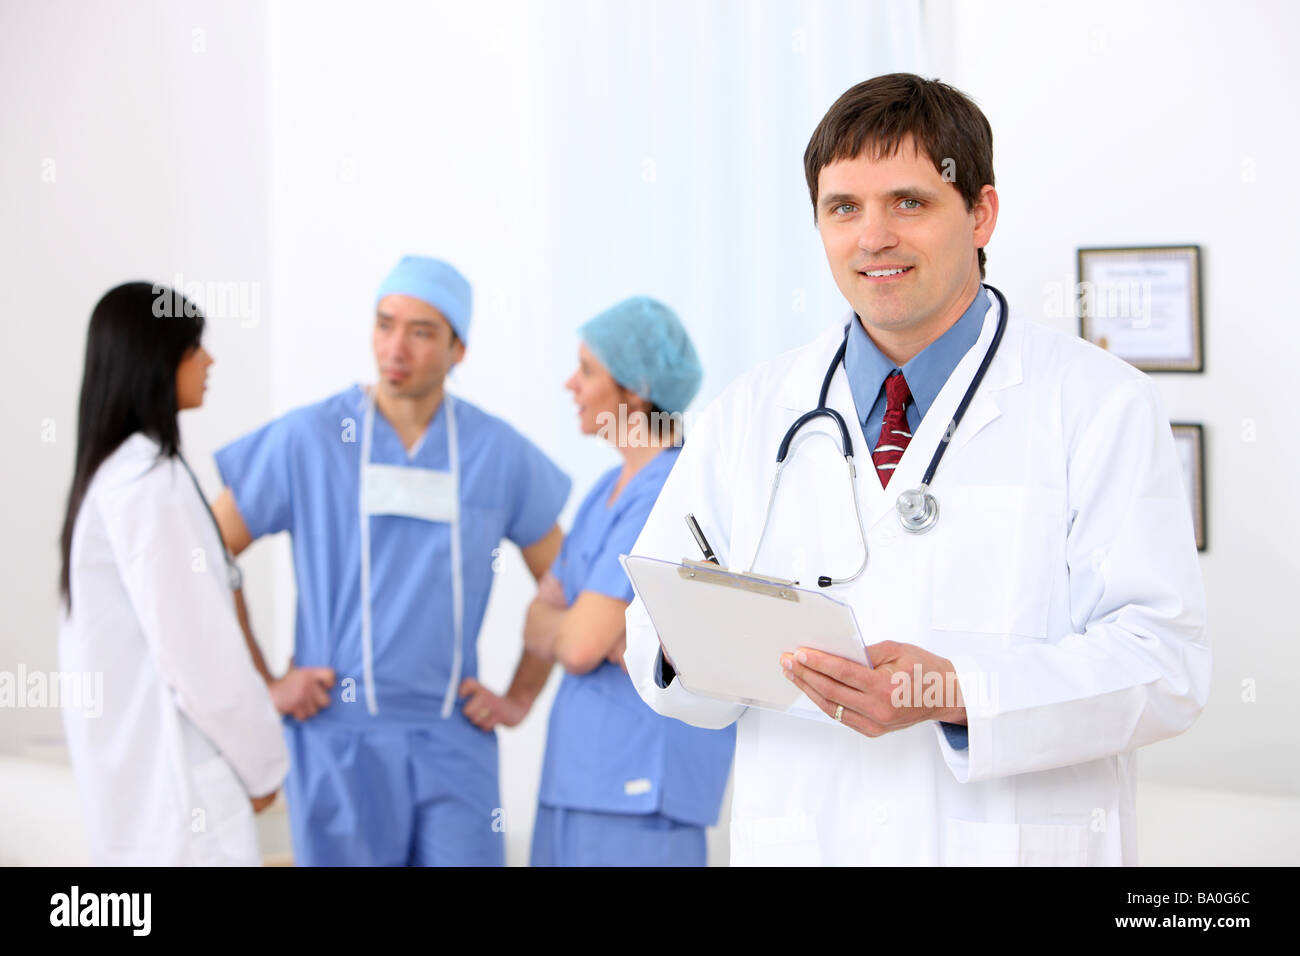 Doctor portrait with medical personnel in background Stock Photo